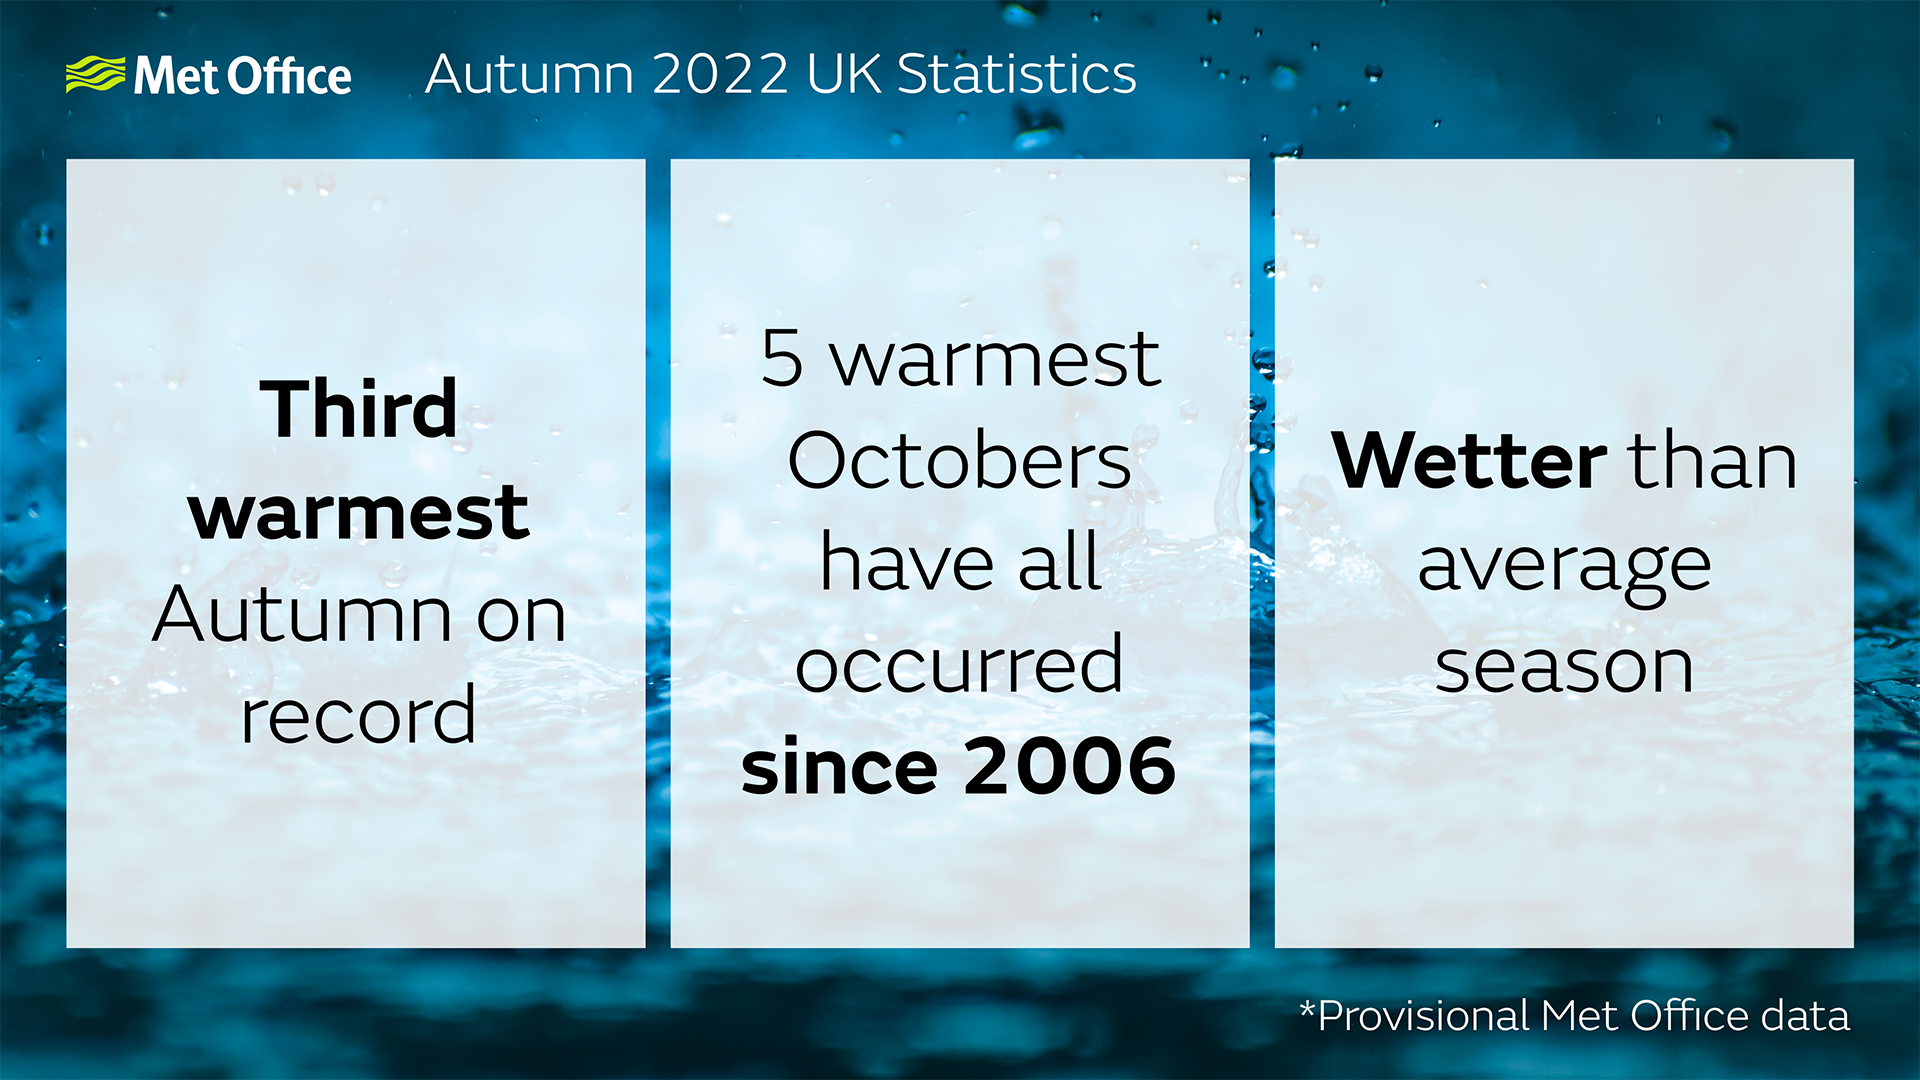 Autumn 2022 UK Statistics - Third warmest Autumn on record. 5 Warmest Octobers have all occurred since 2006. Wetter than average season.